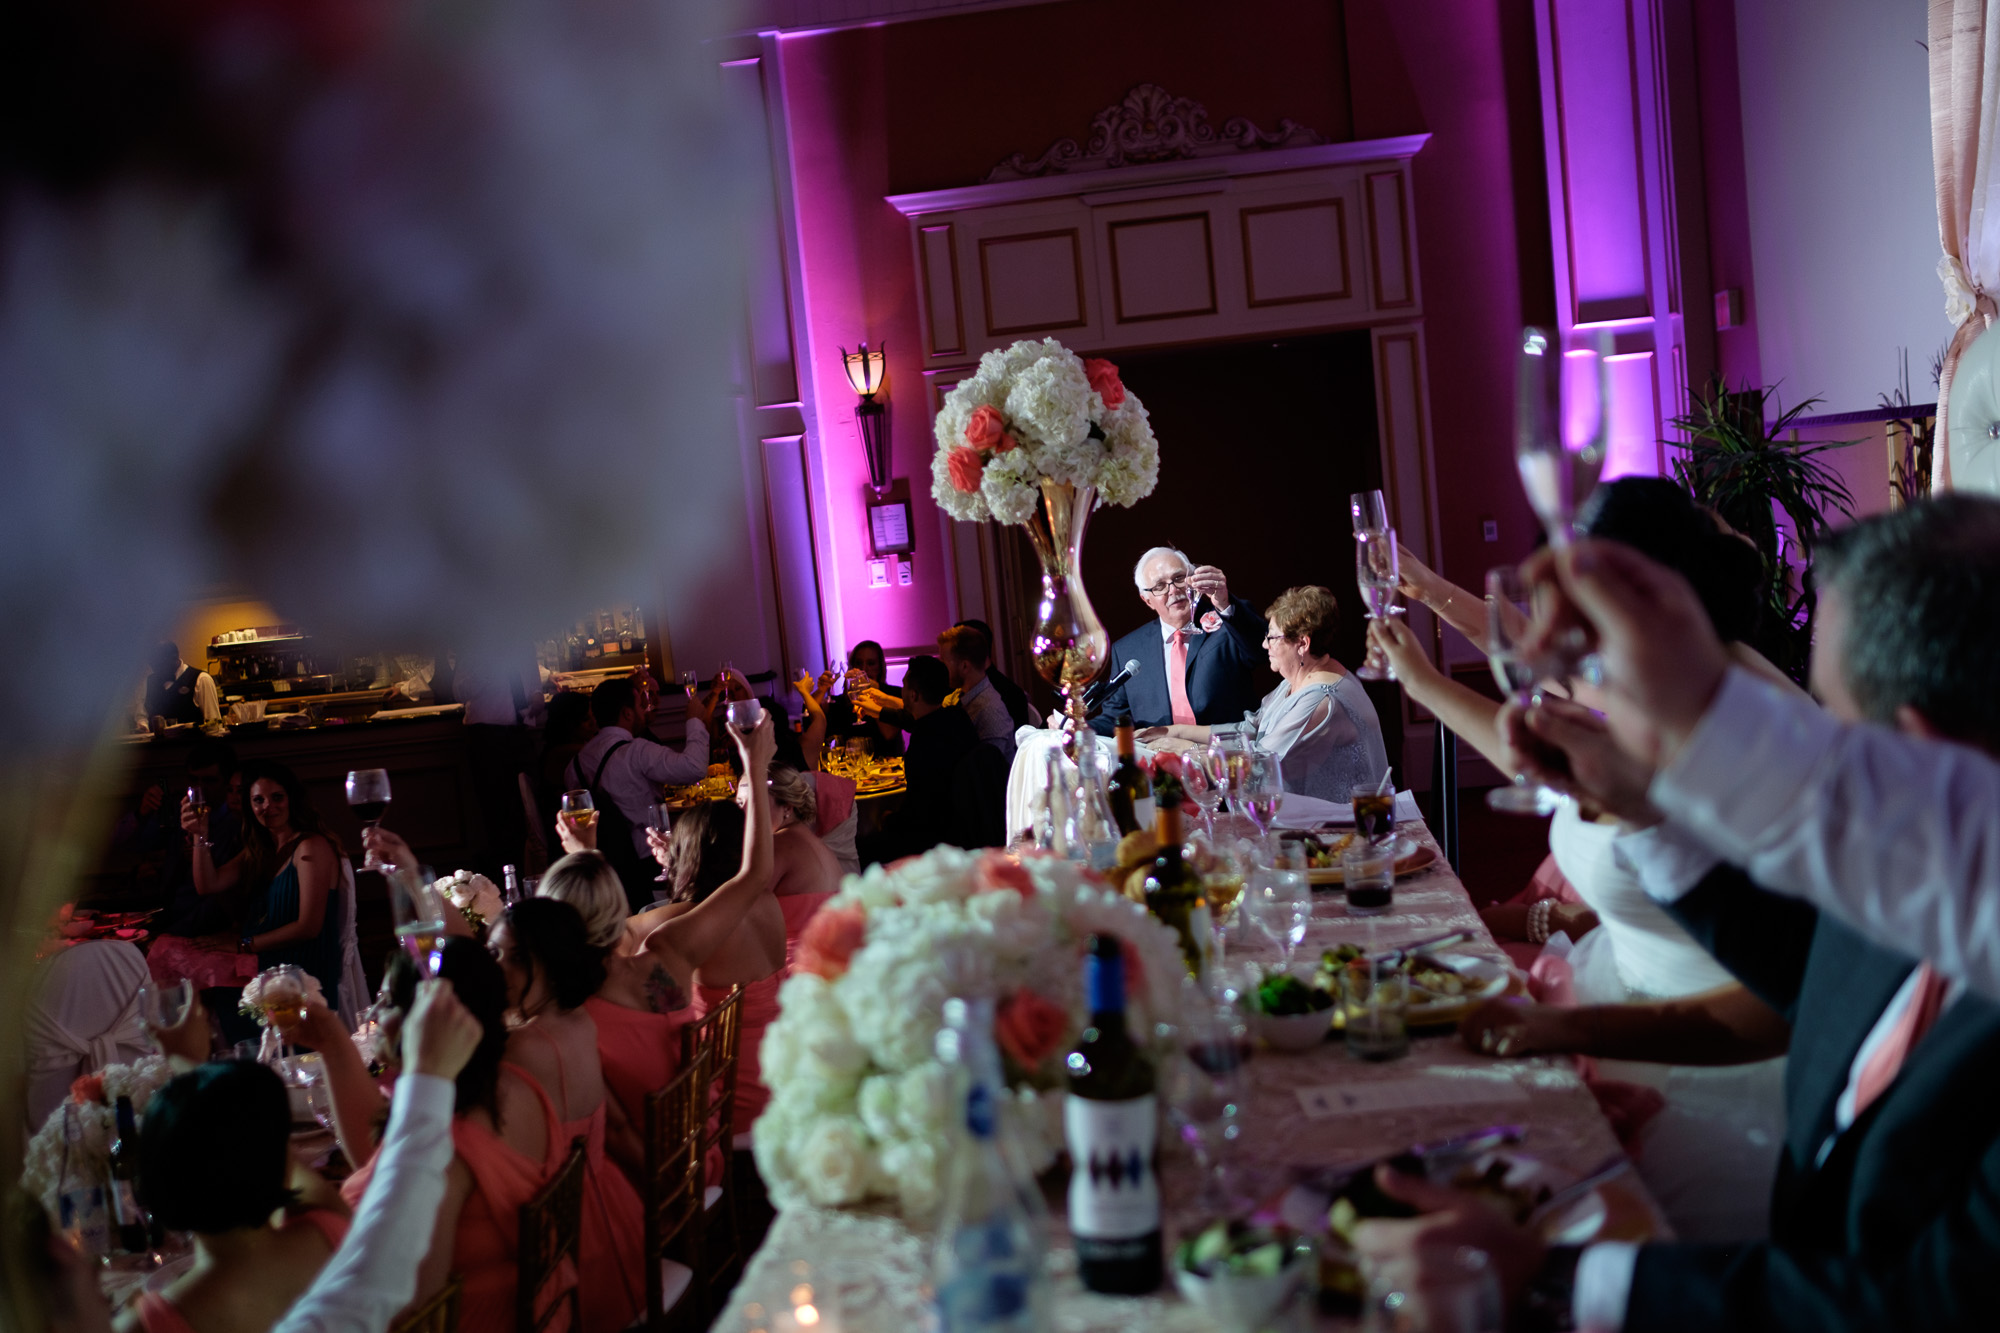  The bride's parents offer a toast to the newlywed couple during their wedding reception at the Toscana hall in Toronto. 